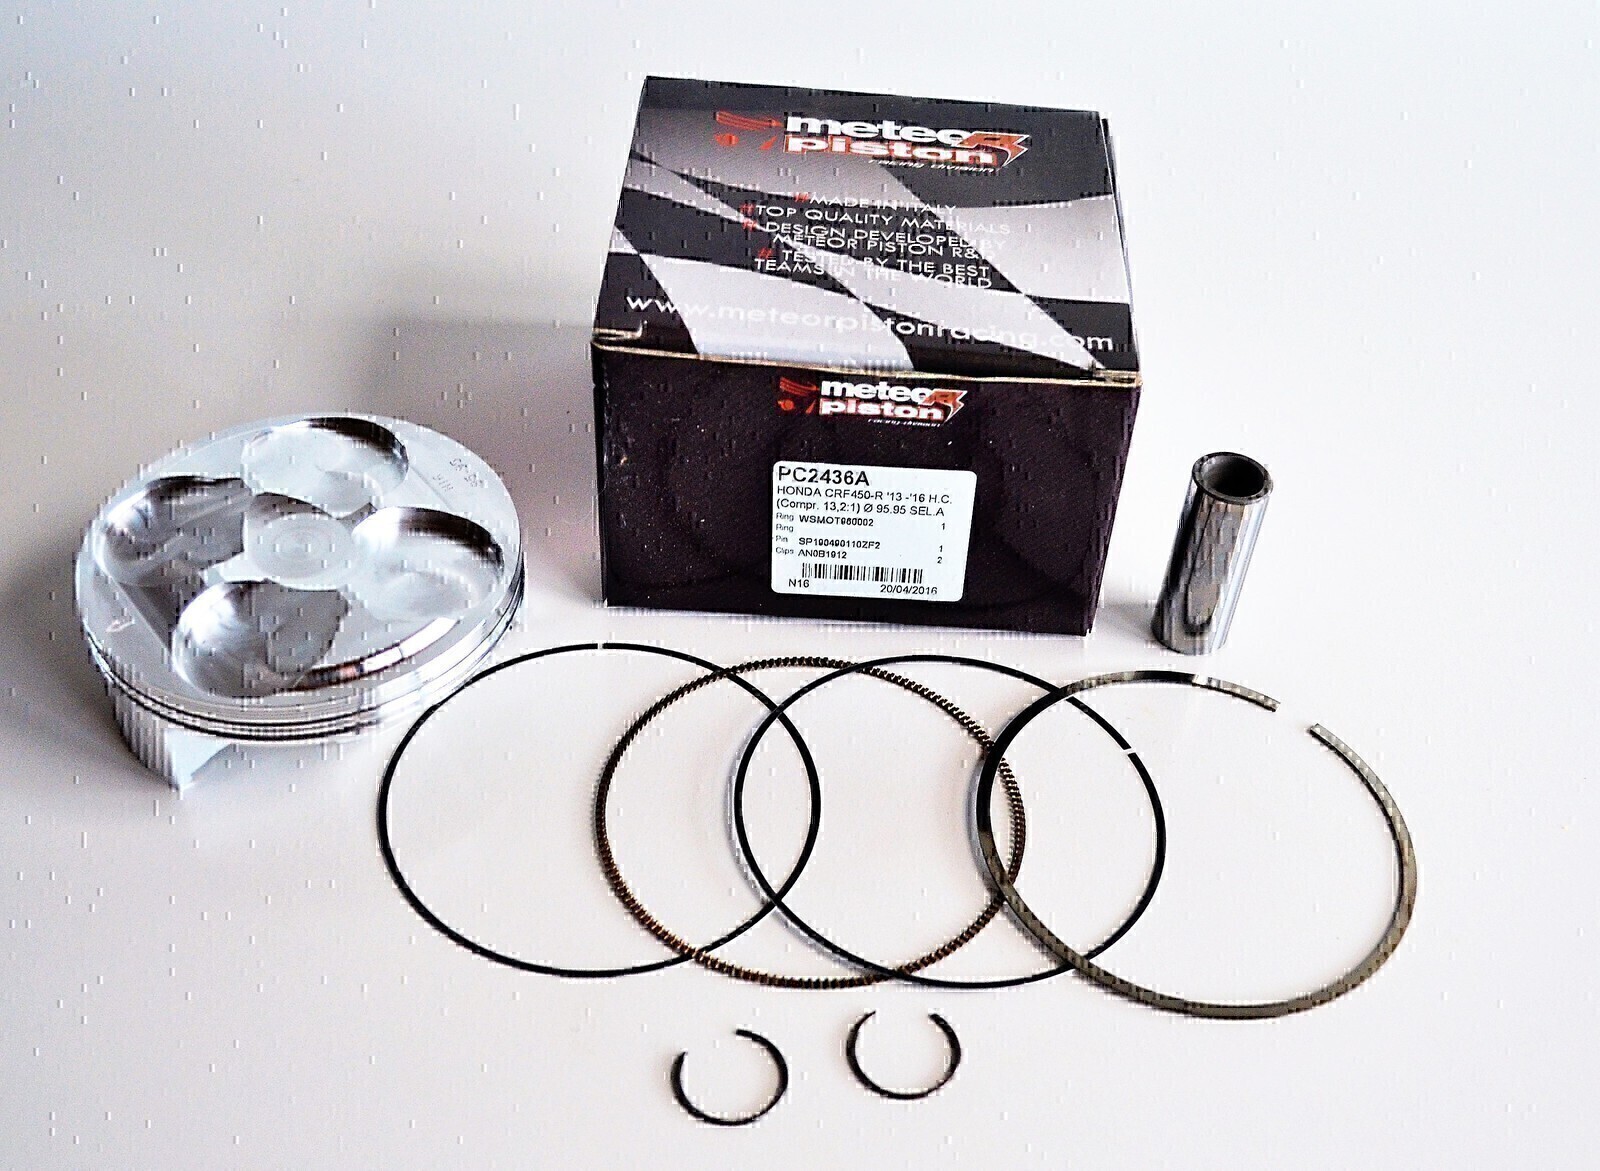 METEOR PISTON KIT FOR HONDA 4T CRF450R 2013 - 2016 HIGH COMP 13.2:1 95.96 SIZE.B